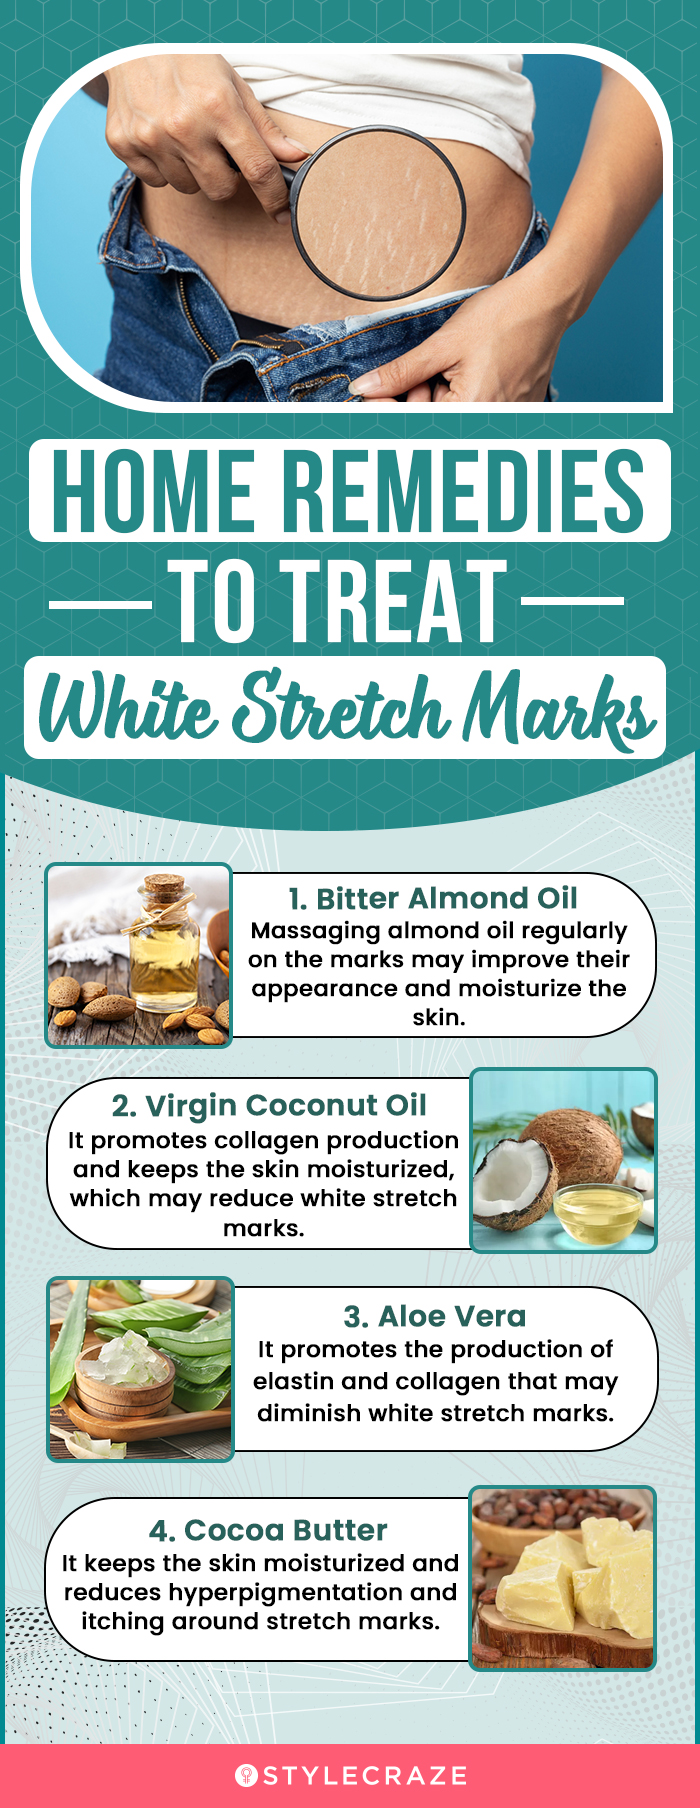 home remedies to treat white stretch marks (infographic)